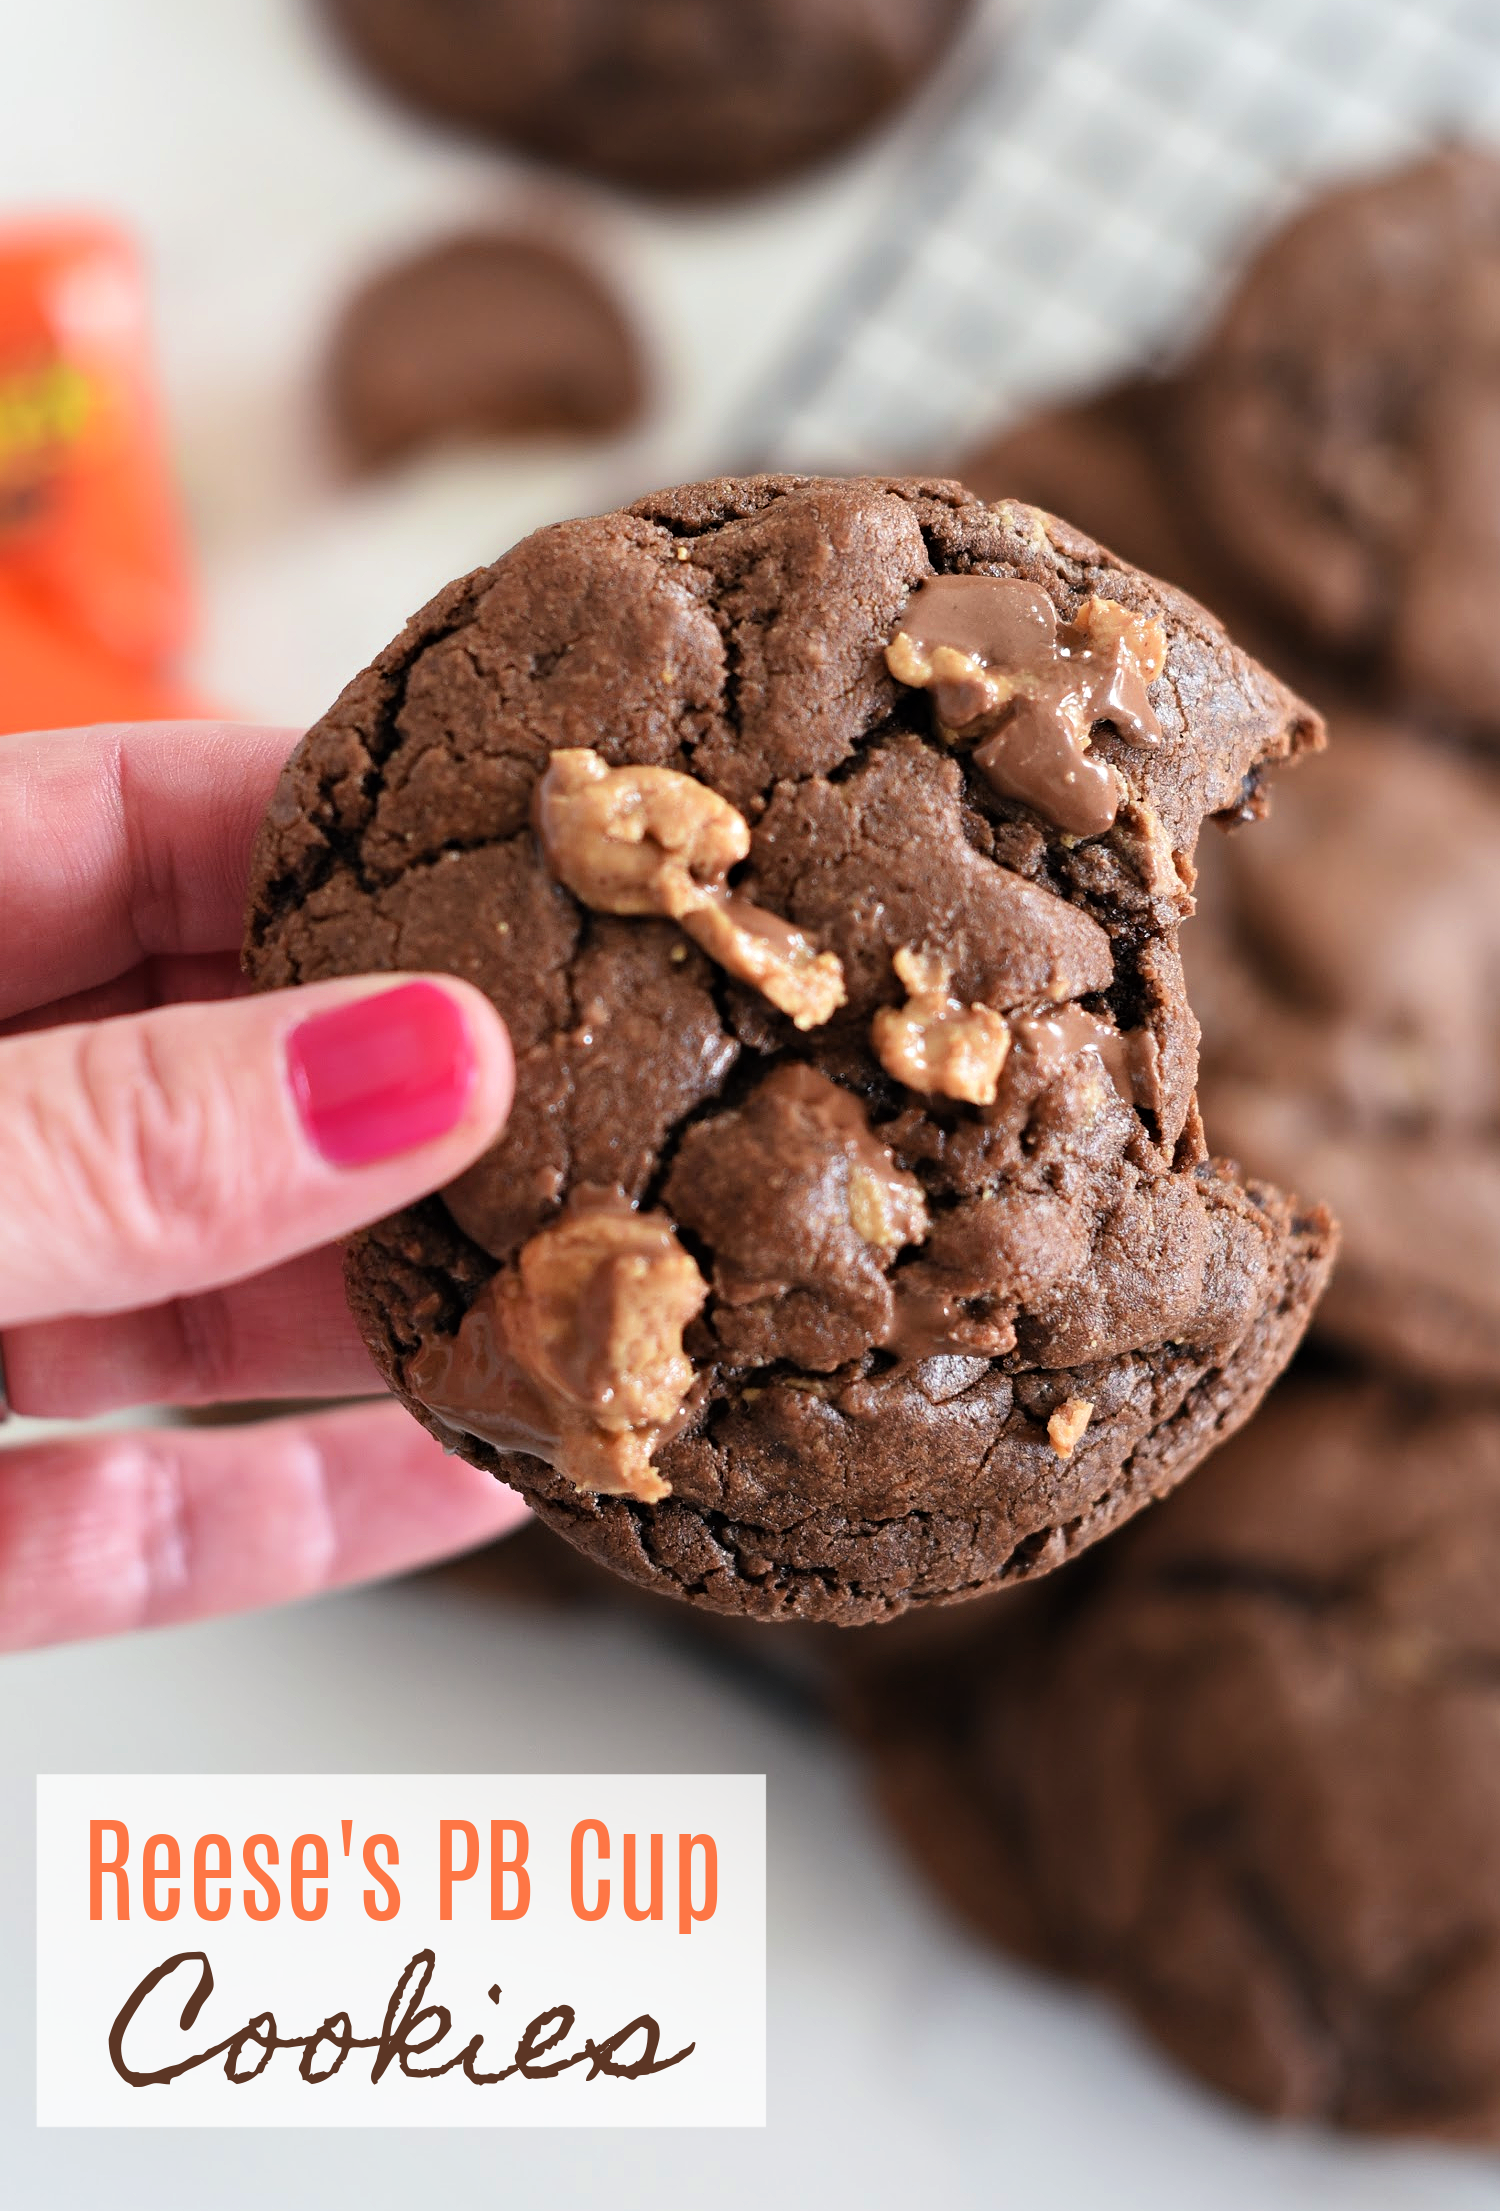 Reese's Peanut Butter Cup Cookies: Chocolate cookies with bits of Reese's Peanut Butter Cups inside. Soft, chewy and amazing cookie recipe. 